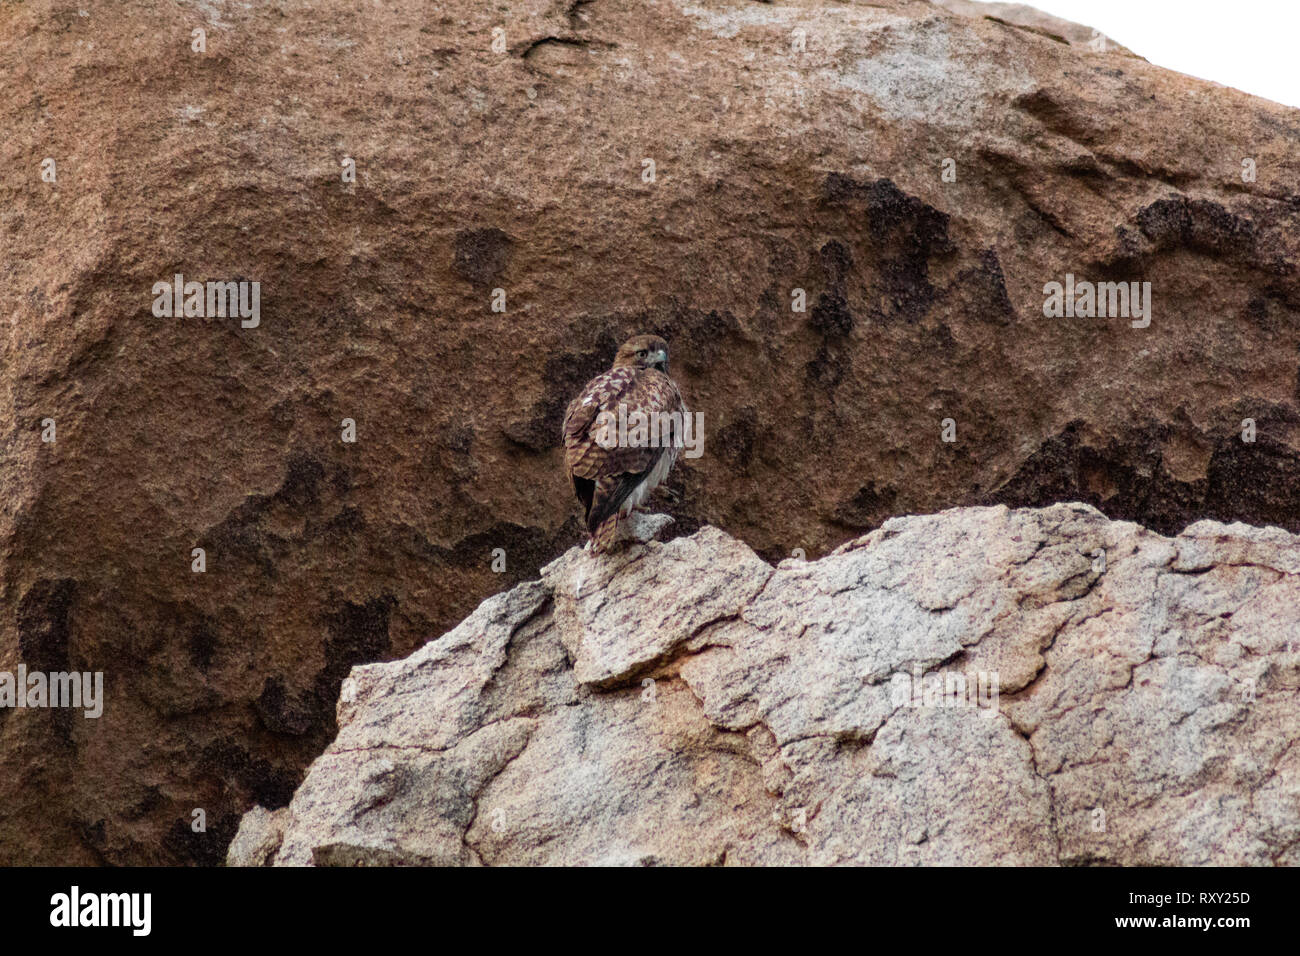 A majestic Red-Tailed Hawk perches firmly on a desert rock. Stock Photo